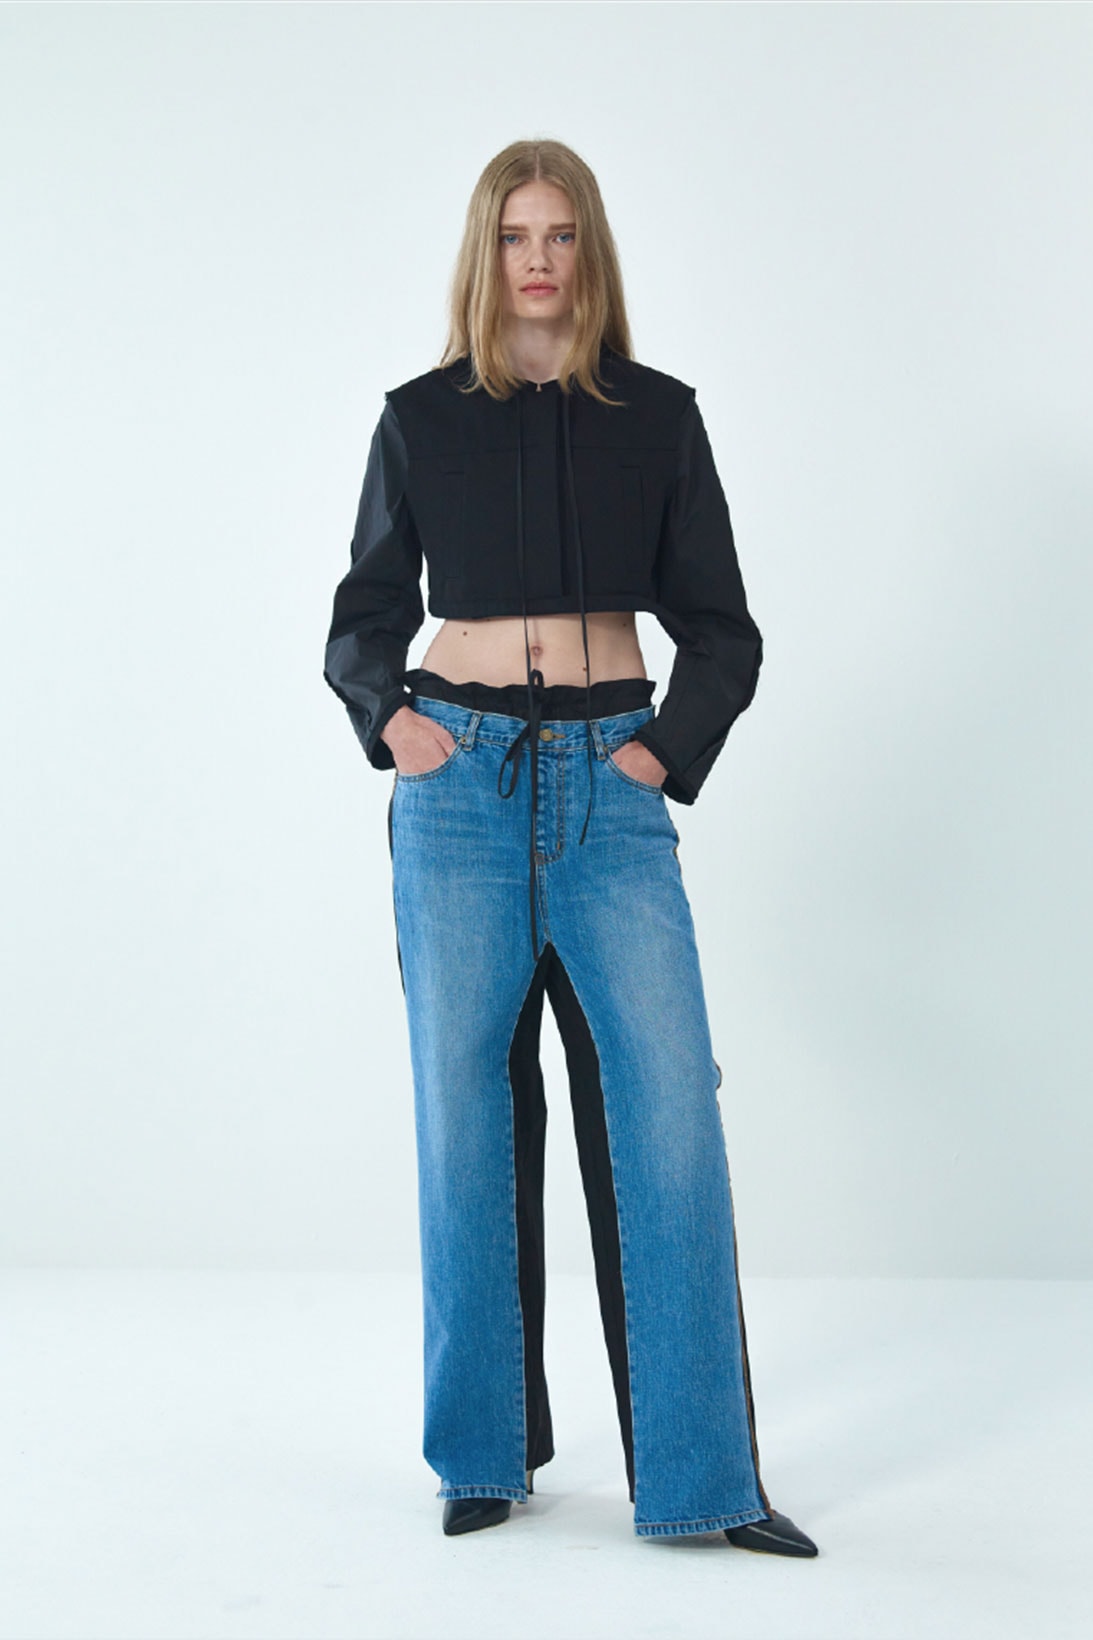 theopen product spring summer 2021 ss21 collection lookbook cropped top jeans denim